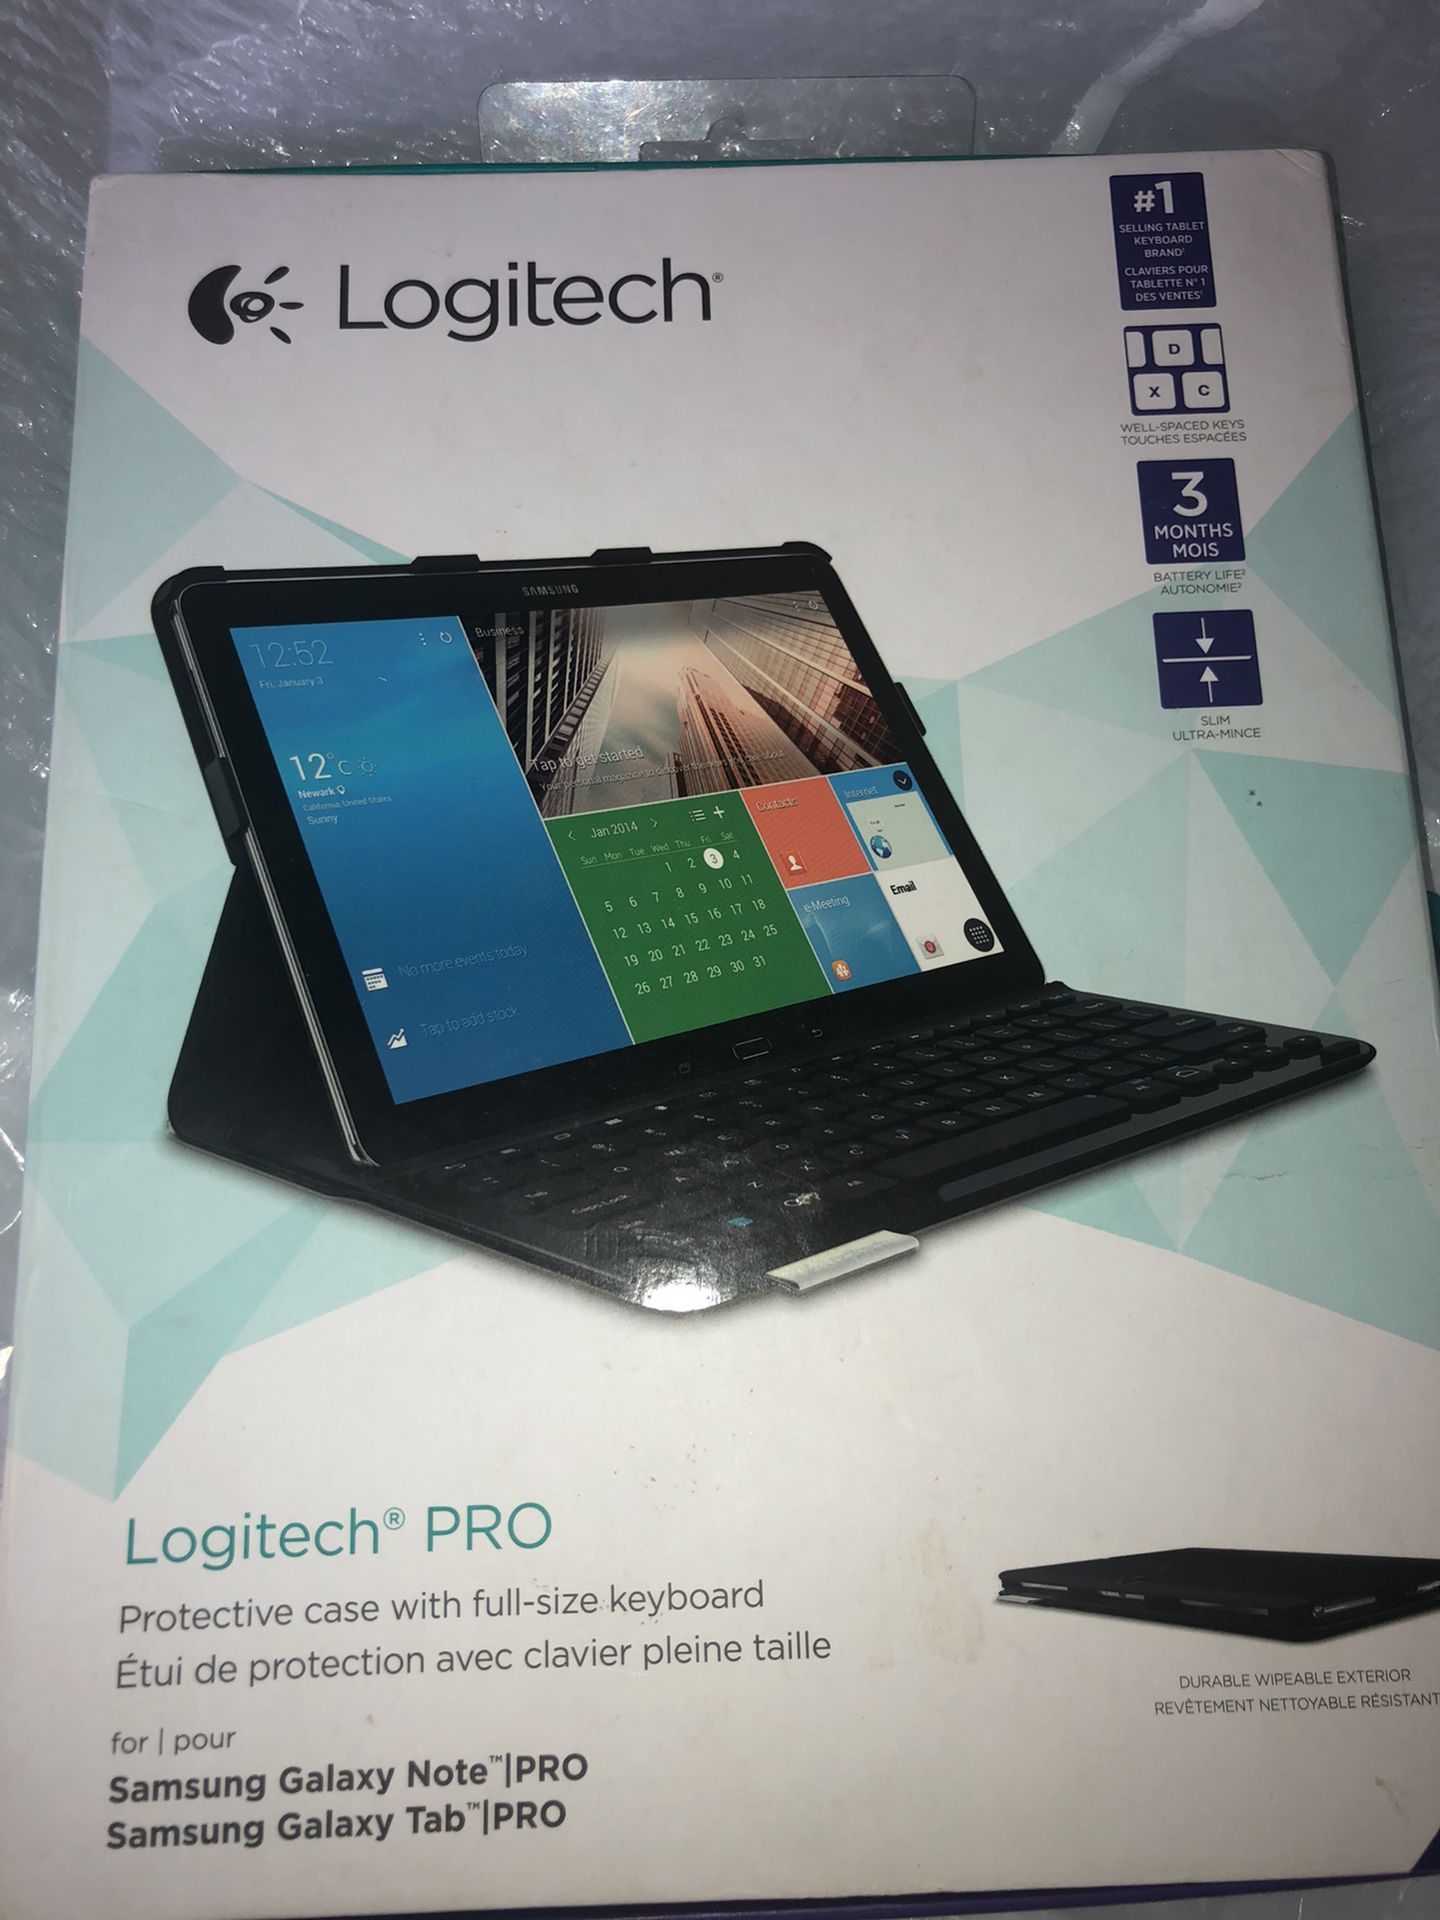 Logitech Pro Protective Case with Full-Size Keyboard for Samsung Galaxy Note Pro and Samsung Galaxy